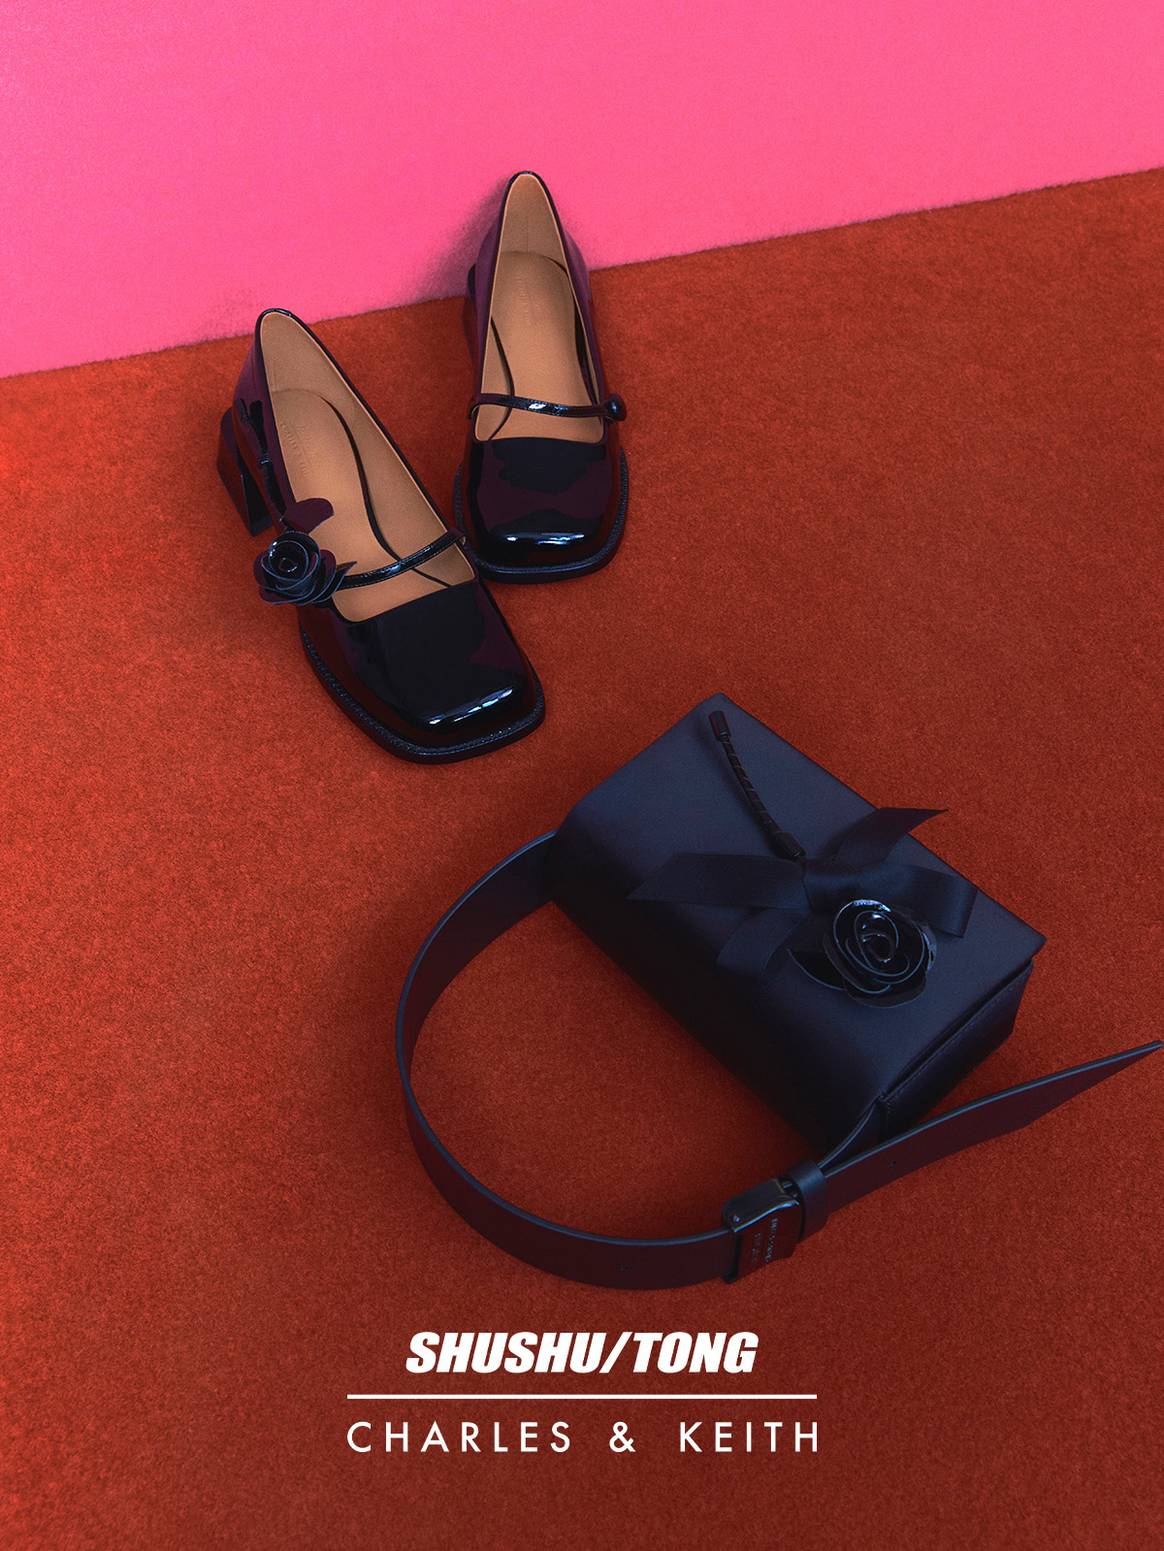 Charles & Keith collaborates with popular Shanghai fashion label  Shushu/Tong - Her World Singapore